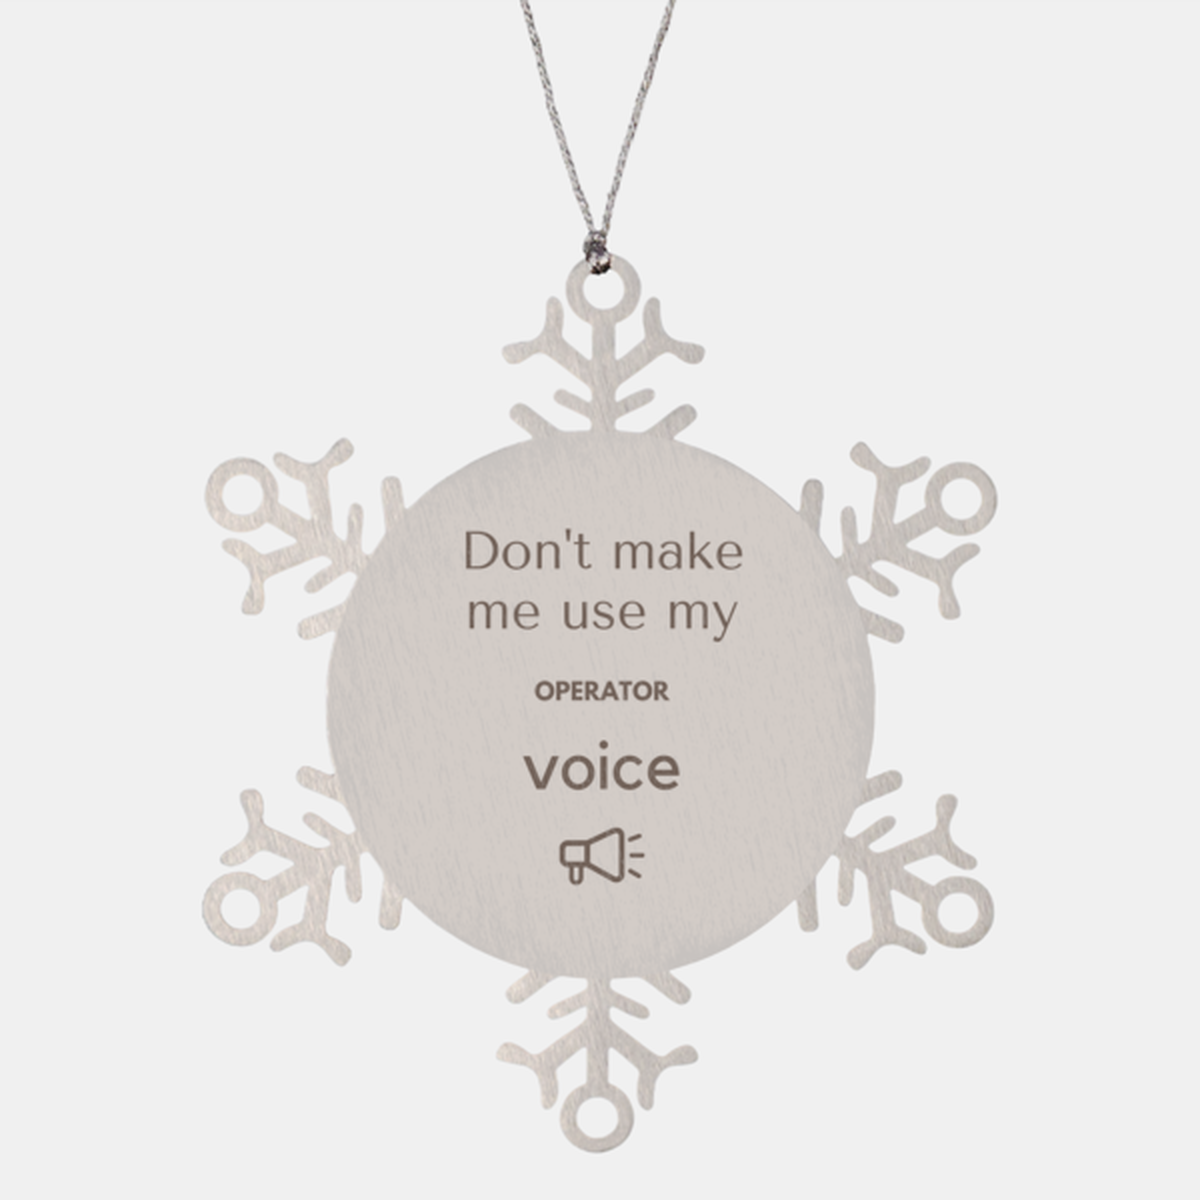 Don't make me use my Operator voice, Sarcasm Operator Ornament Gifts, Christmas Operator Snowflake Ornament Unique Gifts For Operator Coworkers, Men, Women, Colleague, Friends